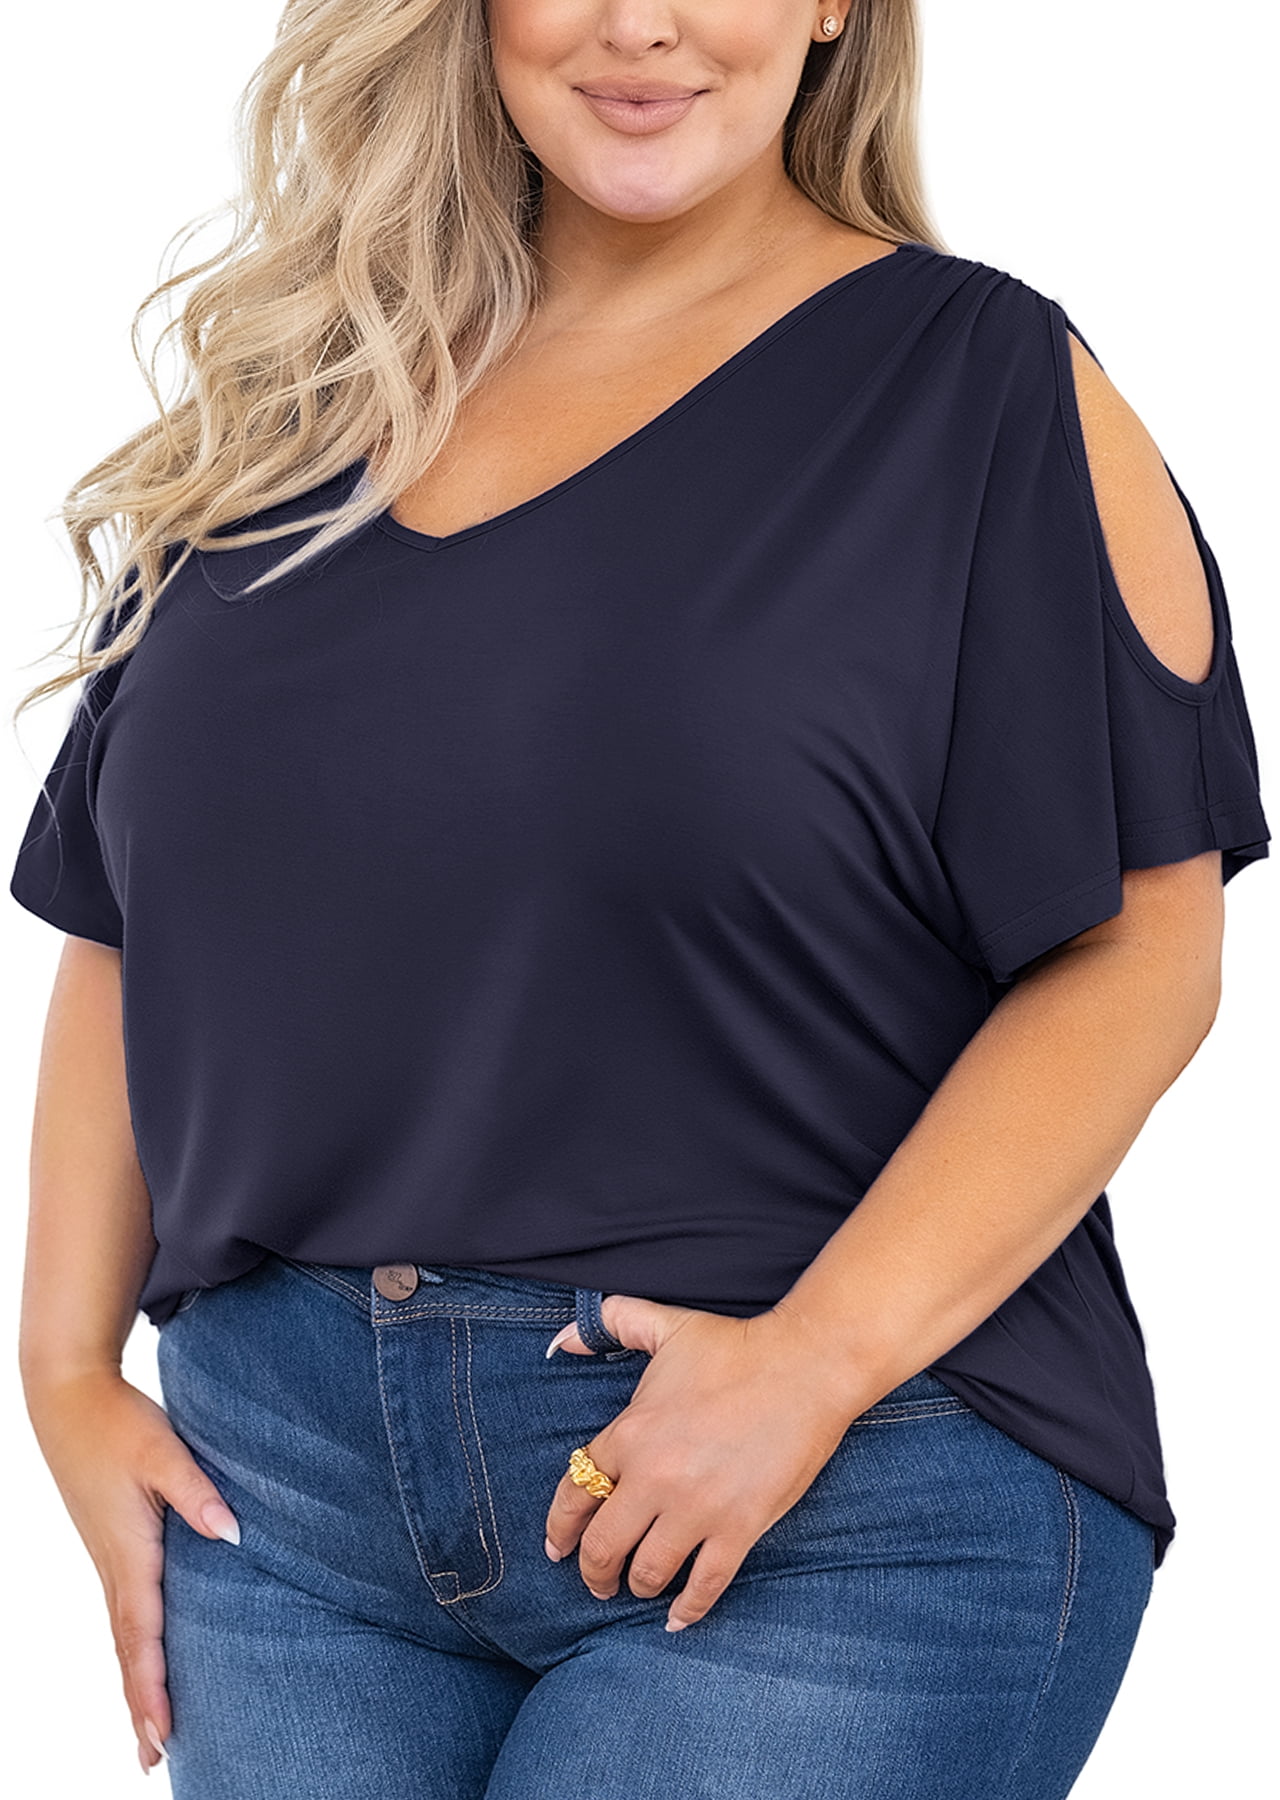 SHOWMALL Plus Size Tops for Women Cold Shoulder Clothes Navy Blue